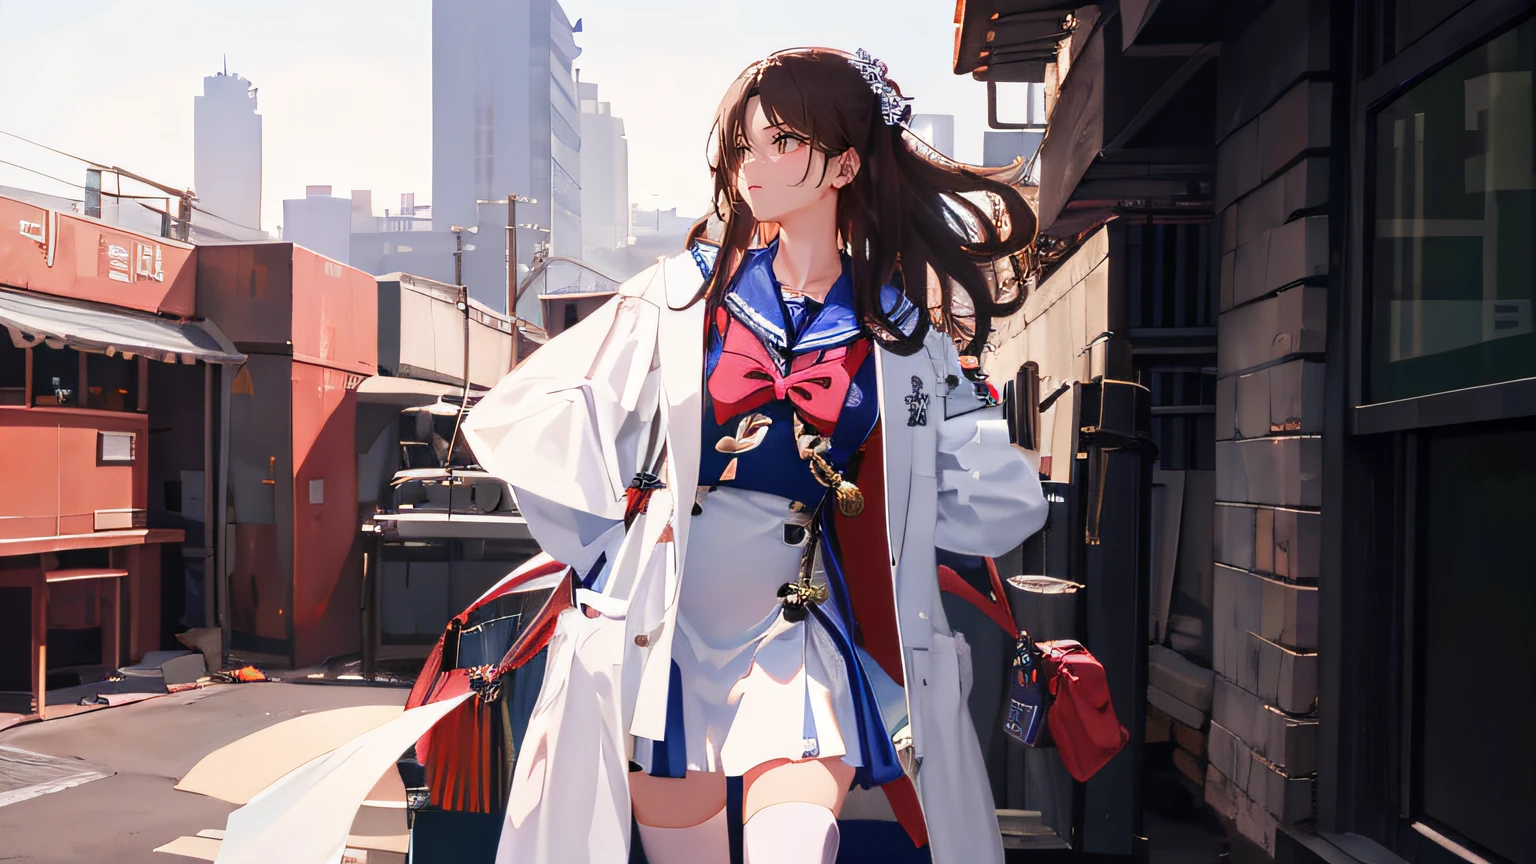 There was a woman in a white coat and black stockings, loose coat collar sailor uniform, full-body xianxia, wearing jacket and skirt, a purple and white dress uniform, portrait of female korean idol, Korean Idol, Cai Xukun, White coat, shaxi, female sailor uniforms, zmonzheng, sakimichan, official photo